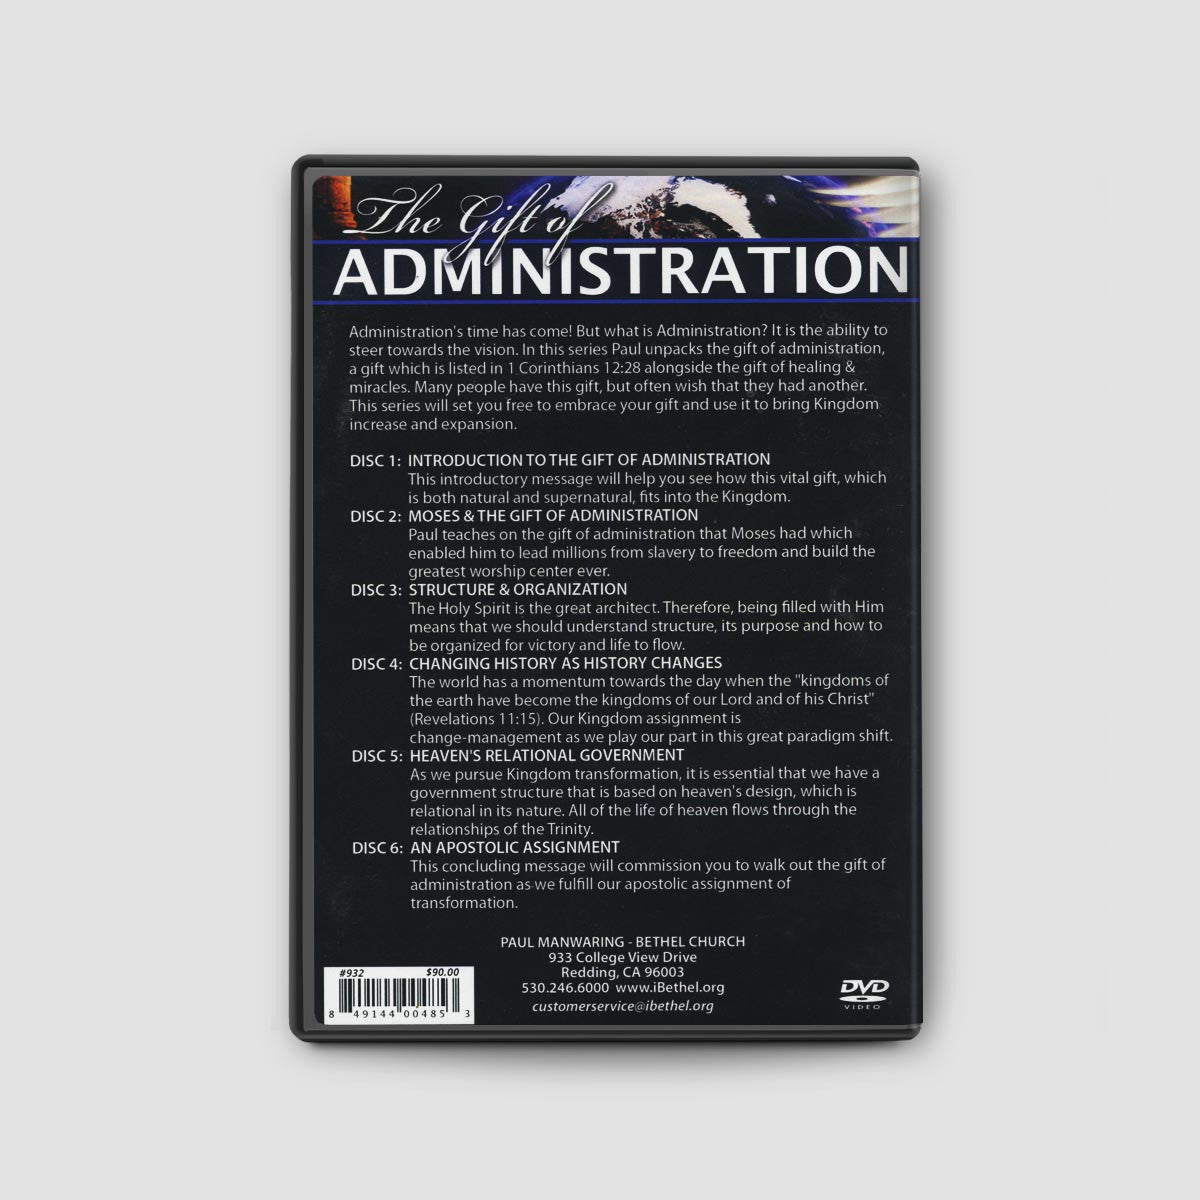 The Gift of Administration